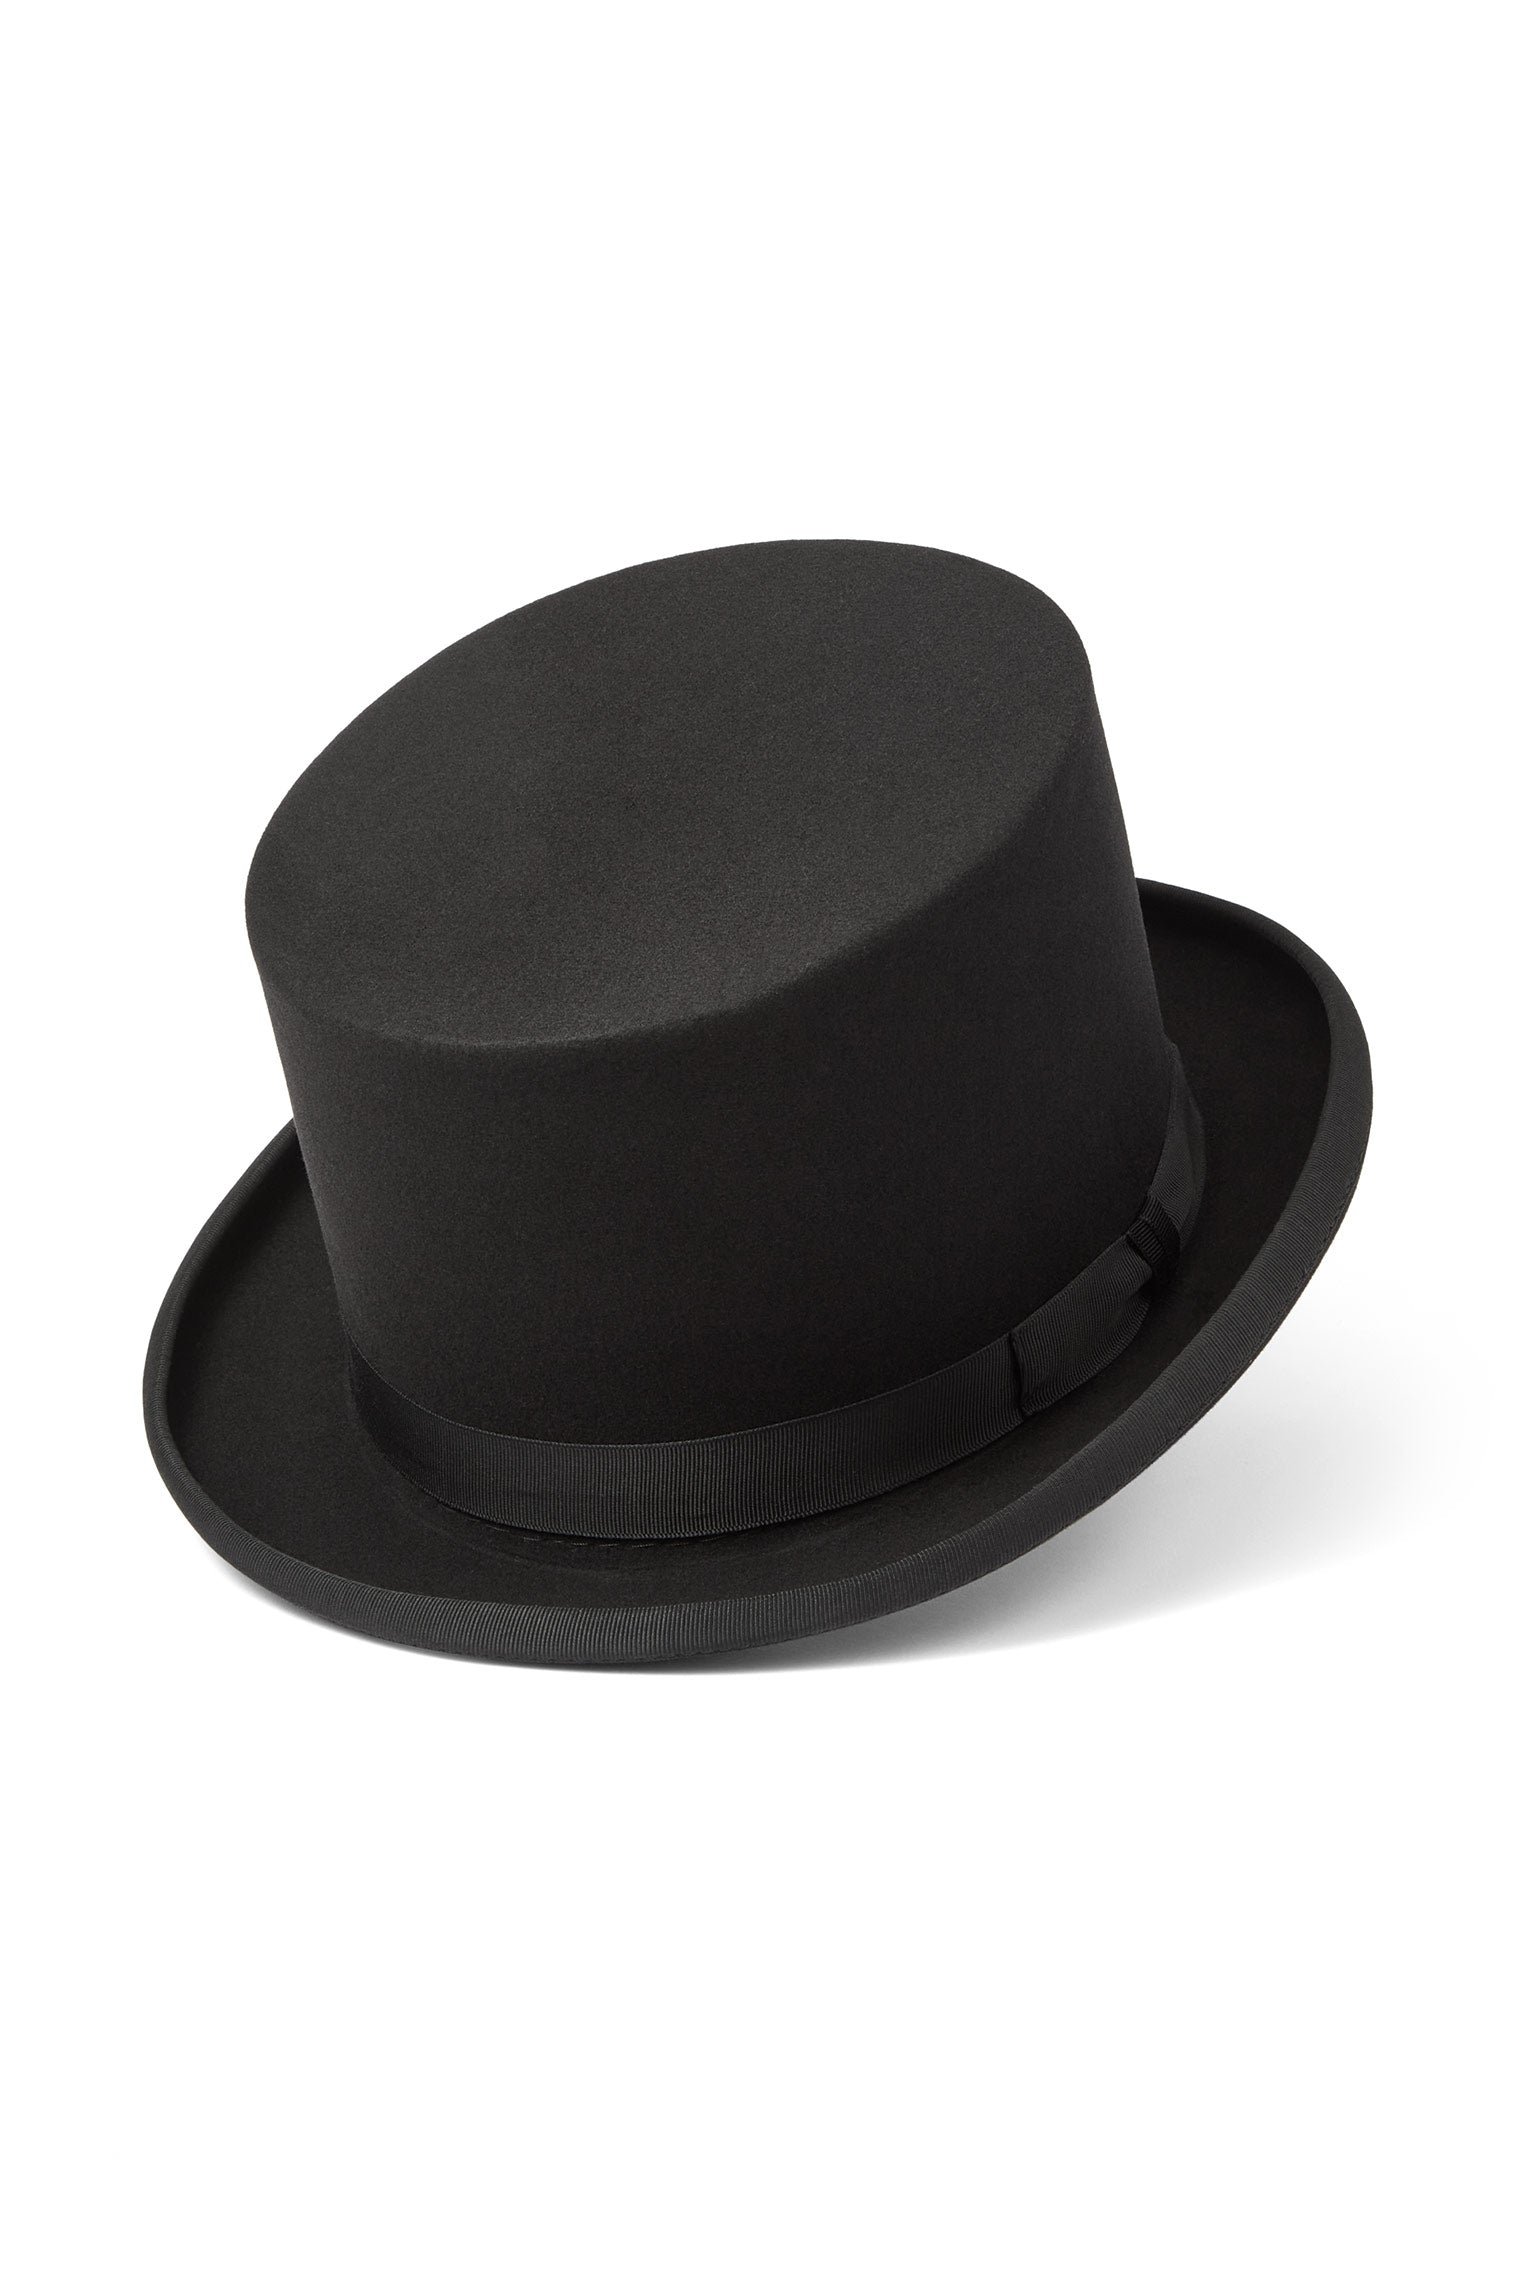 The Oddjob - Limited Edition Collection - Lock & Co. Hatters London UK